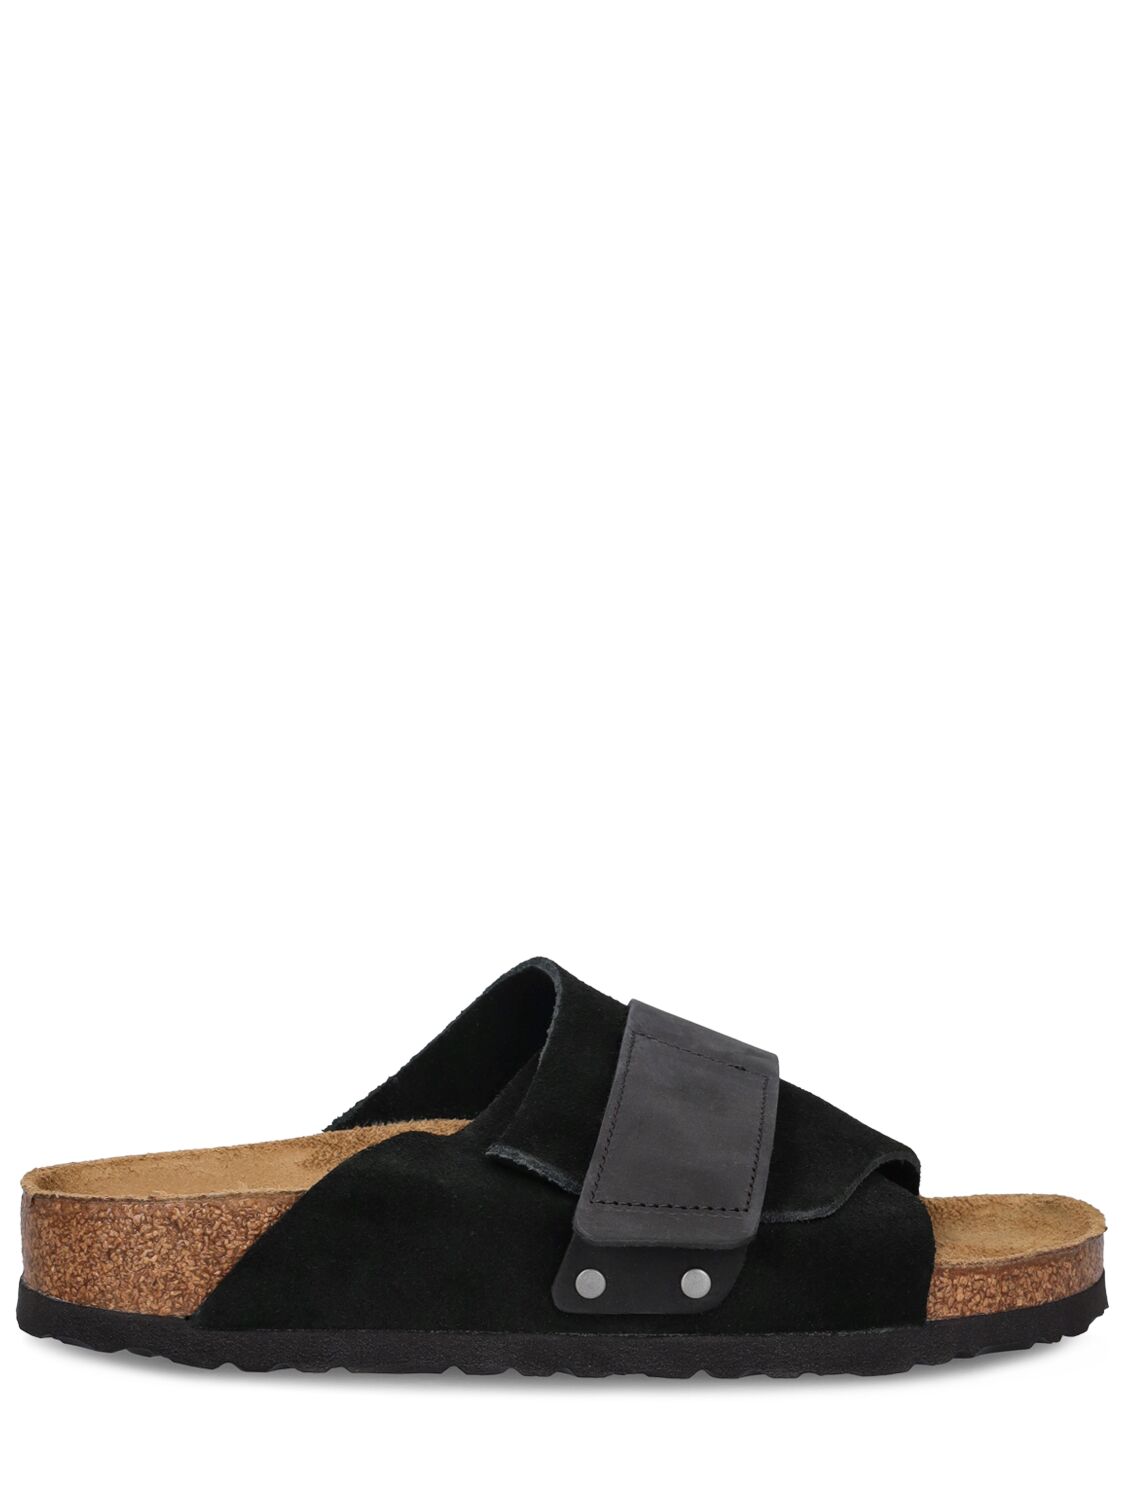 Image of Kyoto Suede Sandals